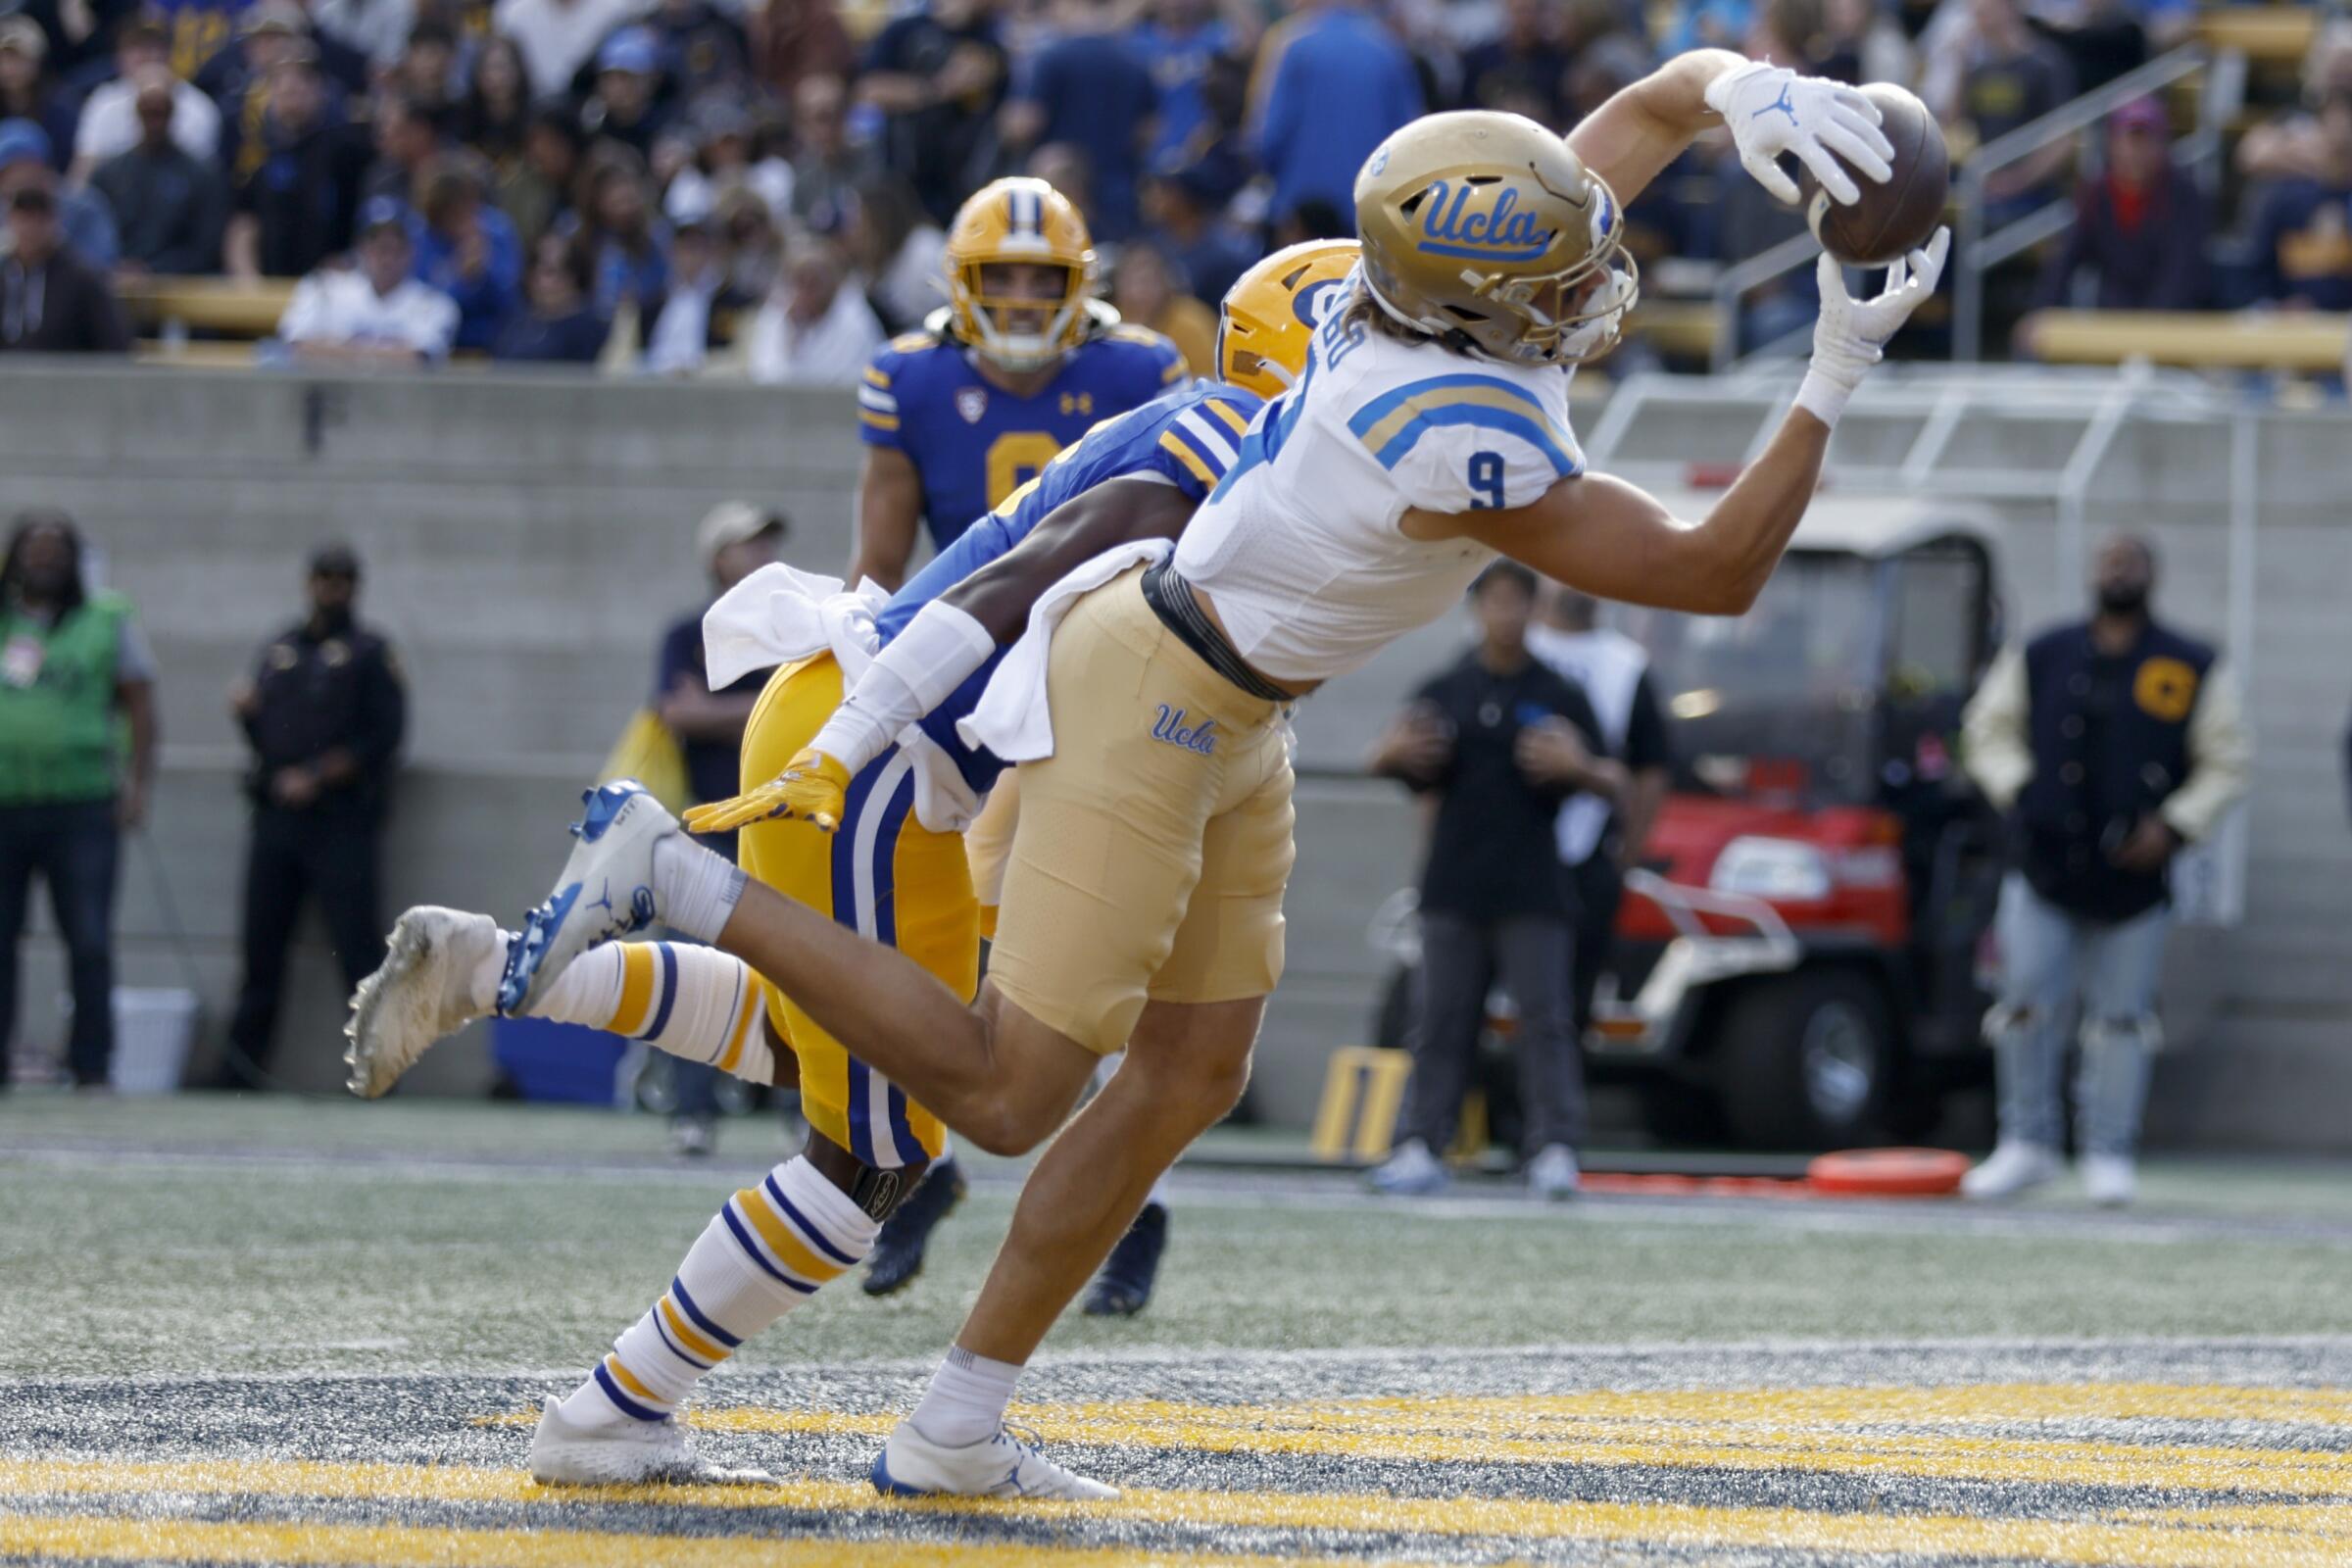 UCLA wide receiver Jake Bobo catches a touchdown pass while defended by California safety Craig Woodson.